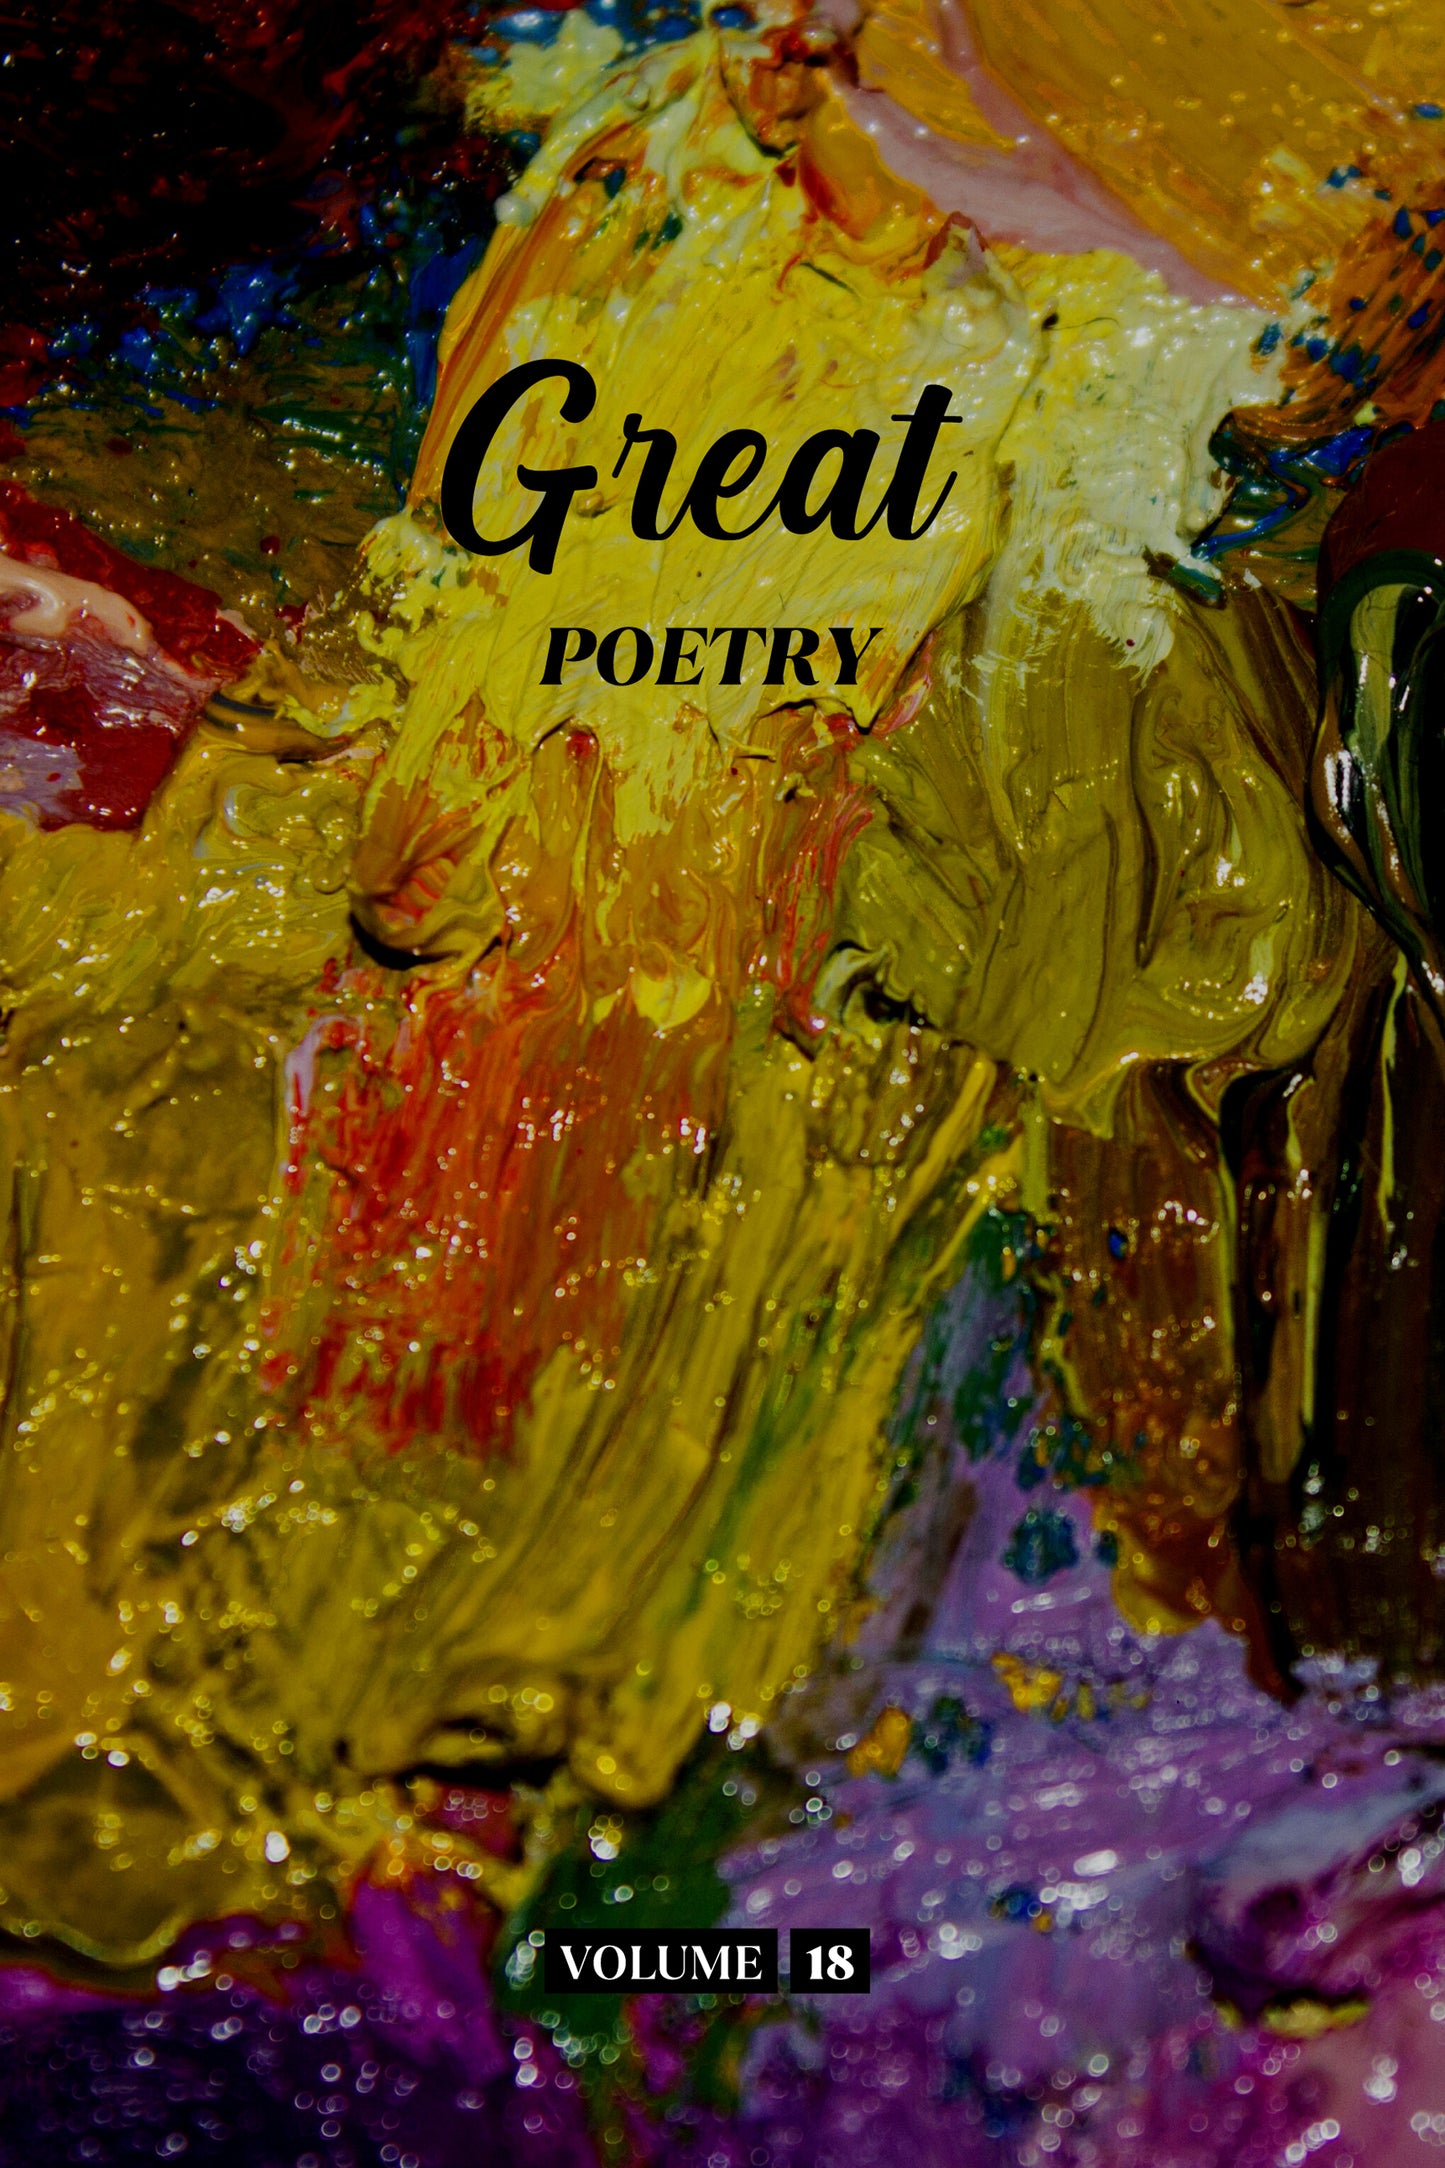 Great Poetry (Volume 18) - Physical Book (Pre-Order)